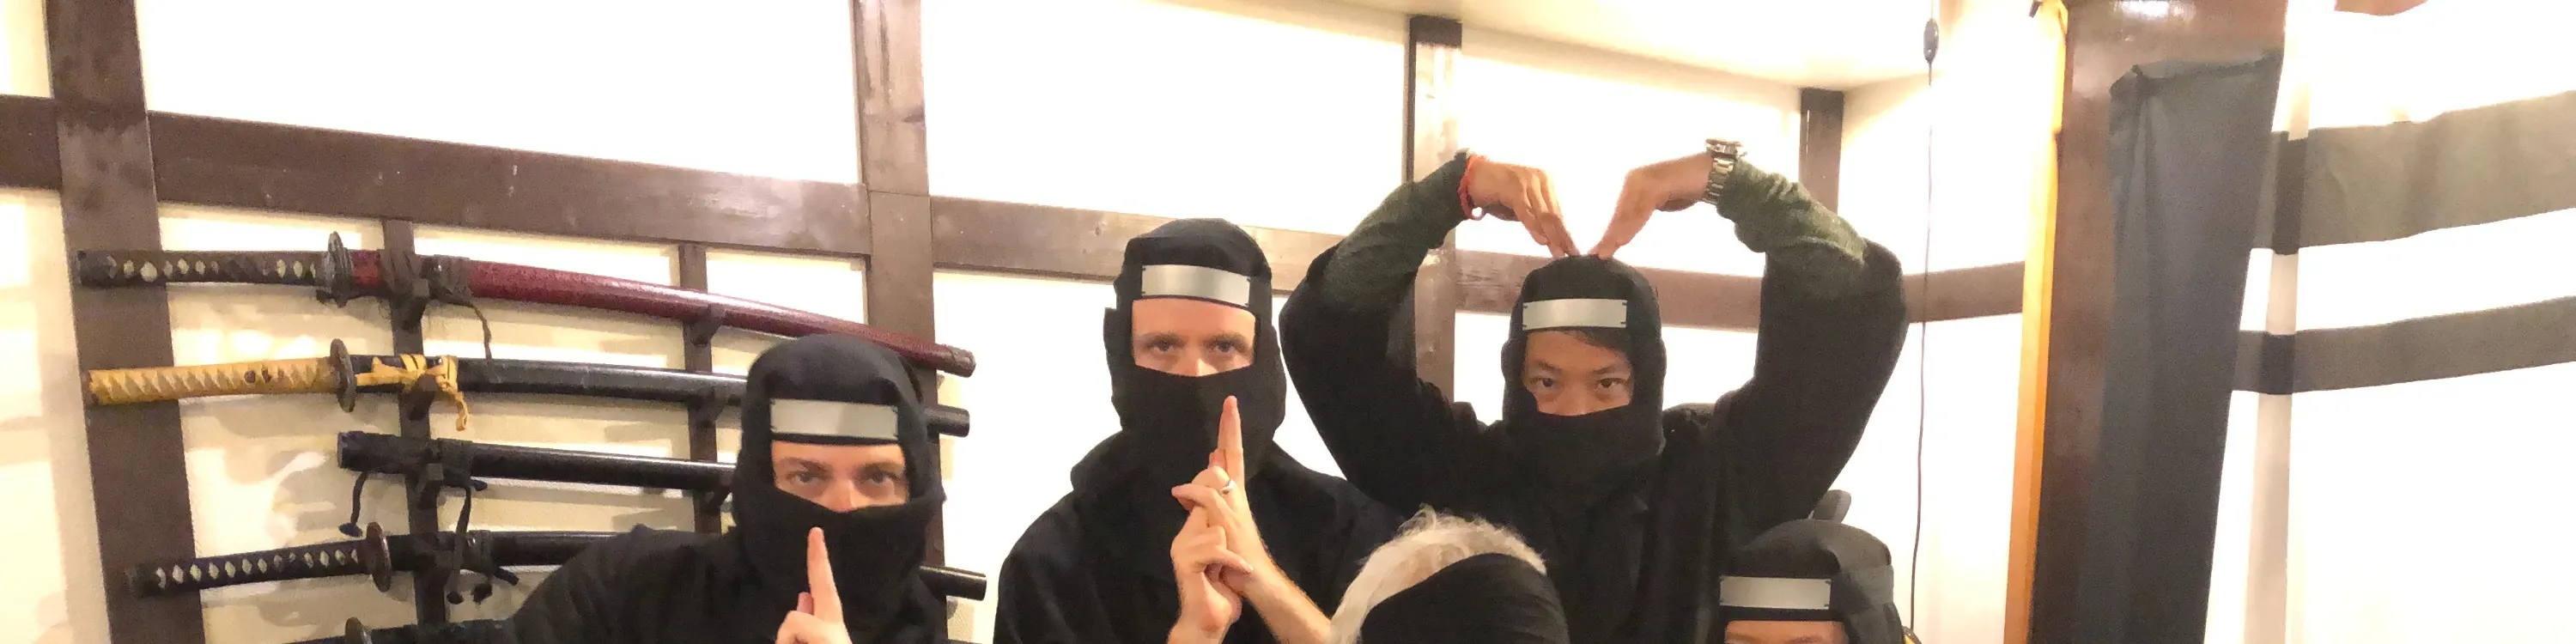 Ninja Workshop and Costume Rental Experience in Osaka - Frequently Asked Questions